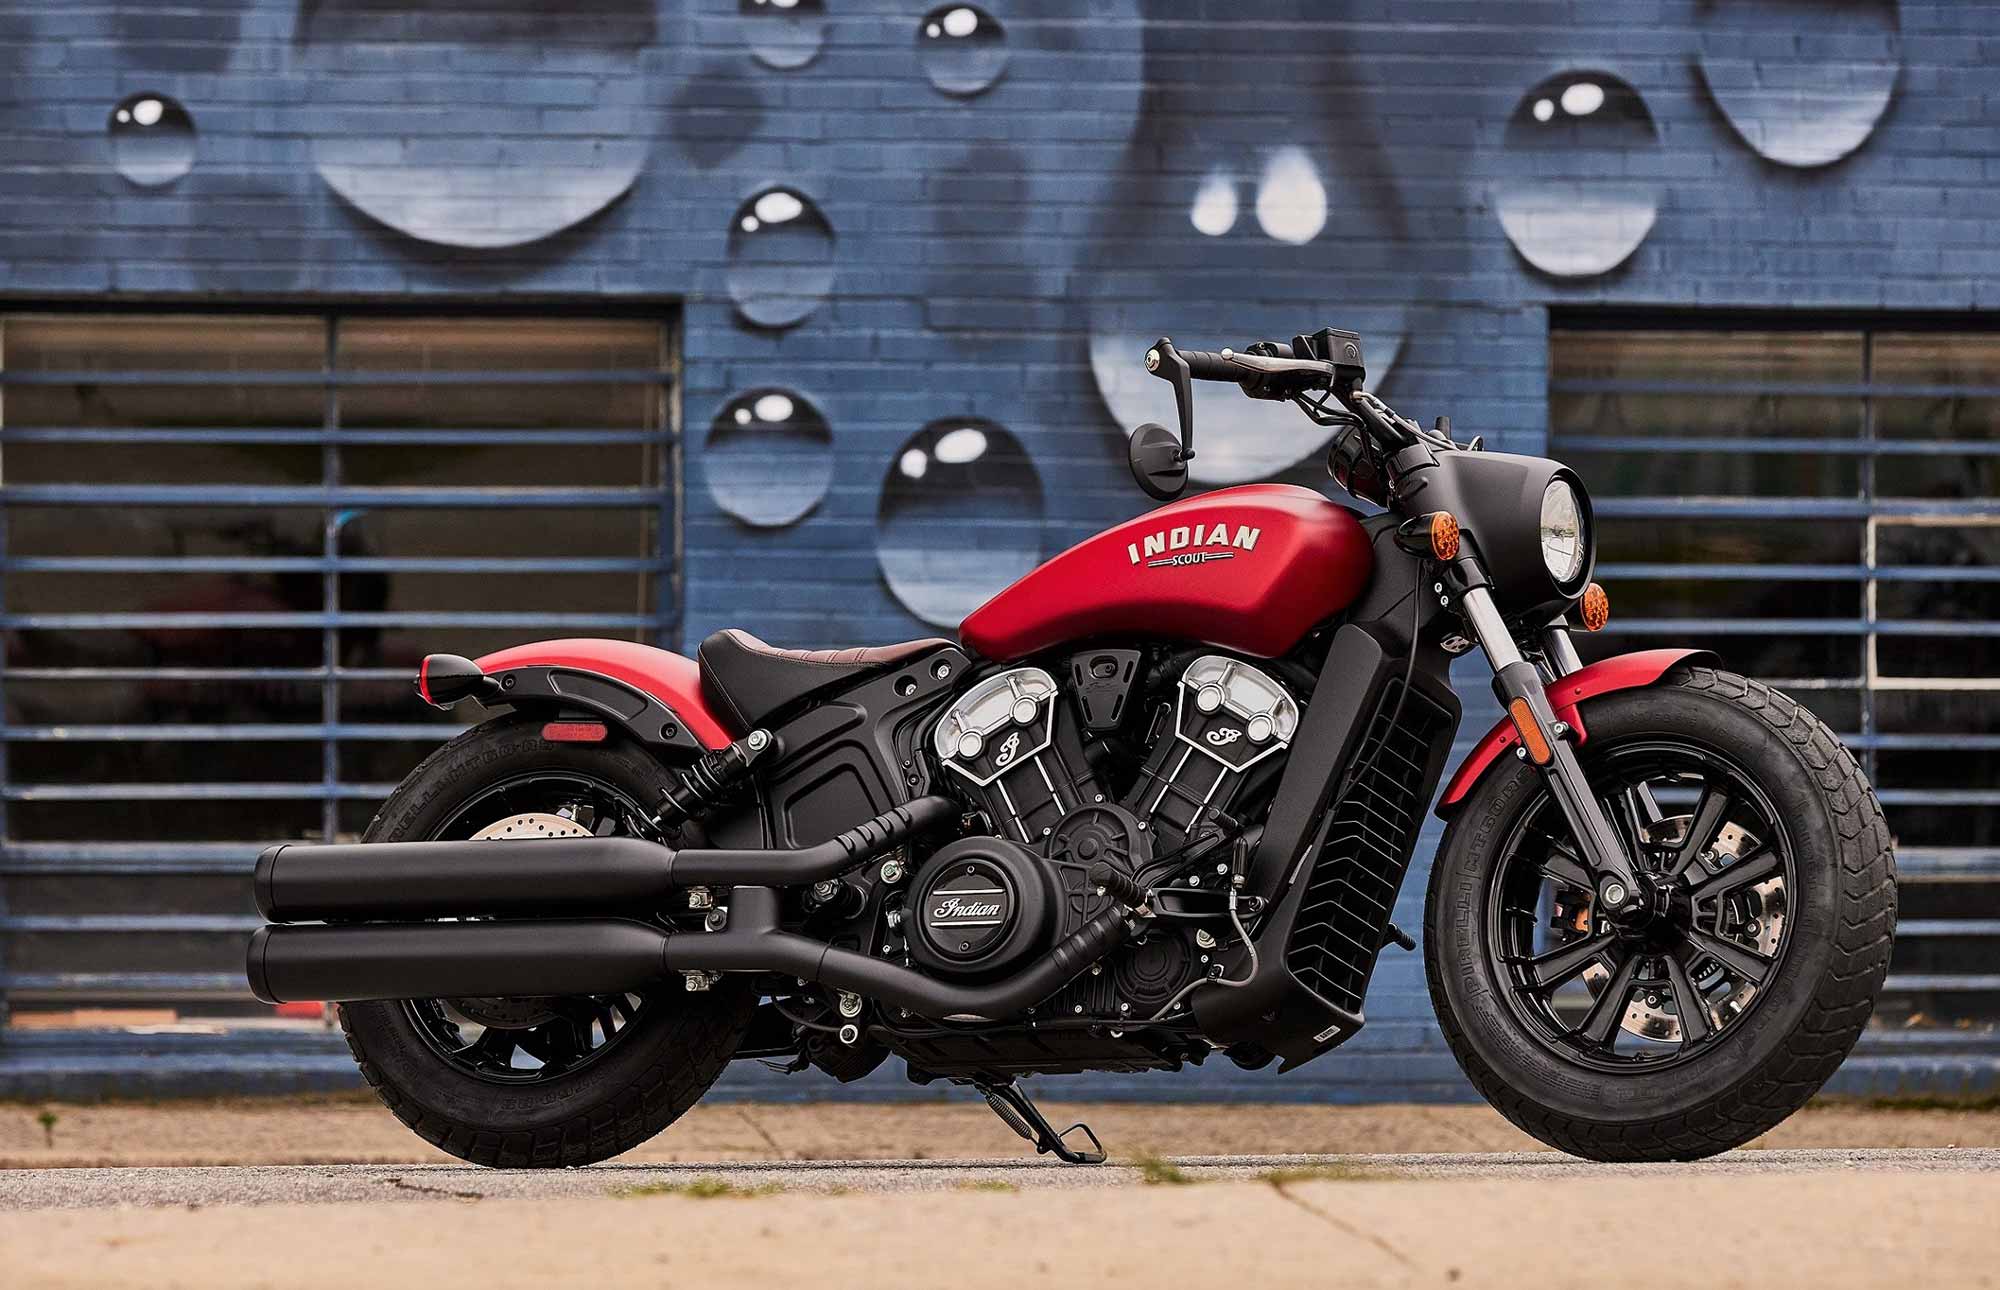 The 2023 Indian Motorcycle Lineup + Our Take on Each Model